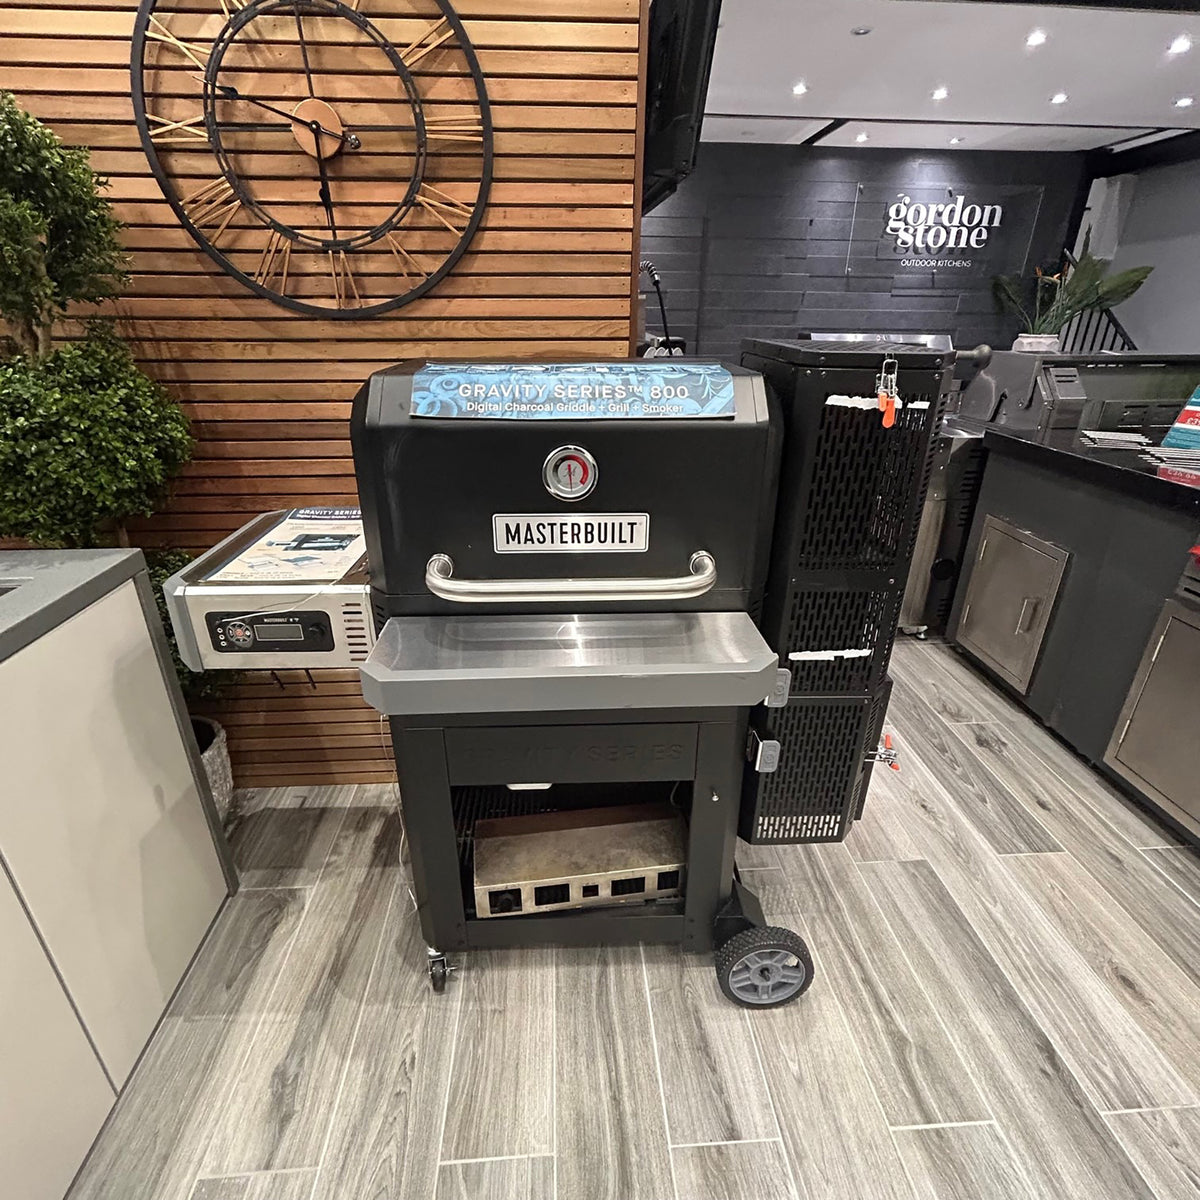 Ex Display Masterbuilt Digital Charcoal Grill, Smoker And Griddle Gravity Fed 800